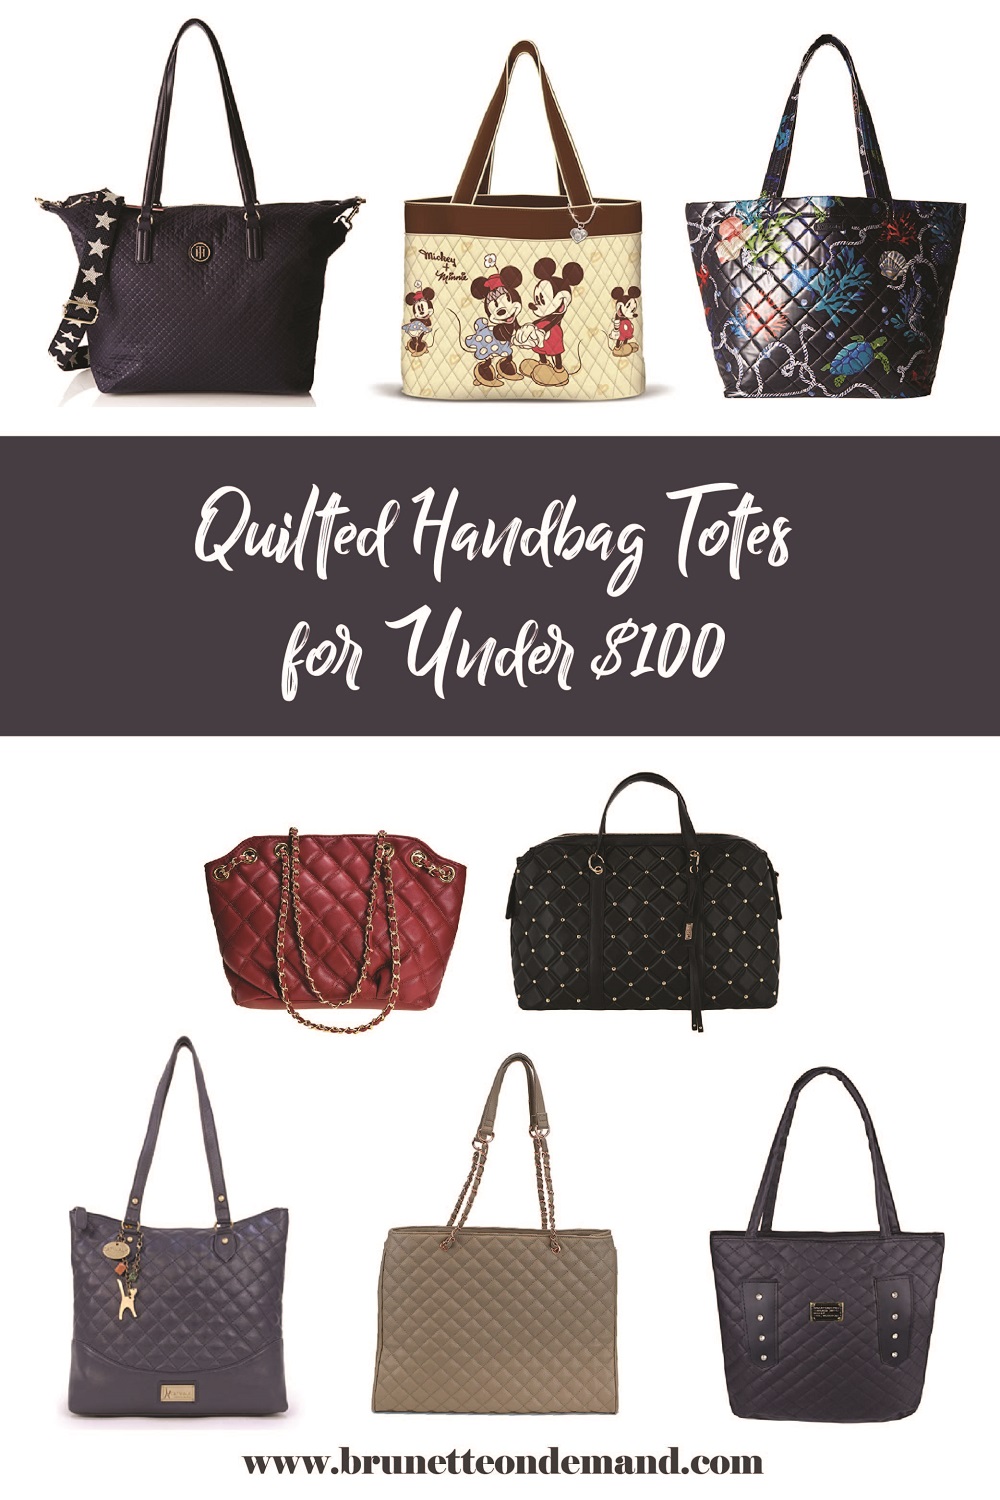 Amazing Quilted Handbag Totes for Under $100